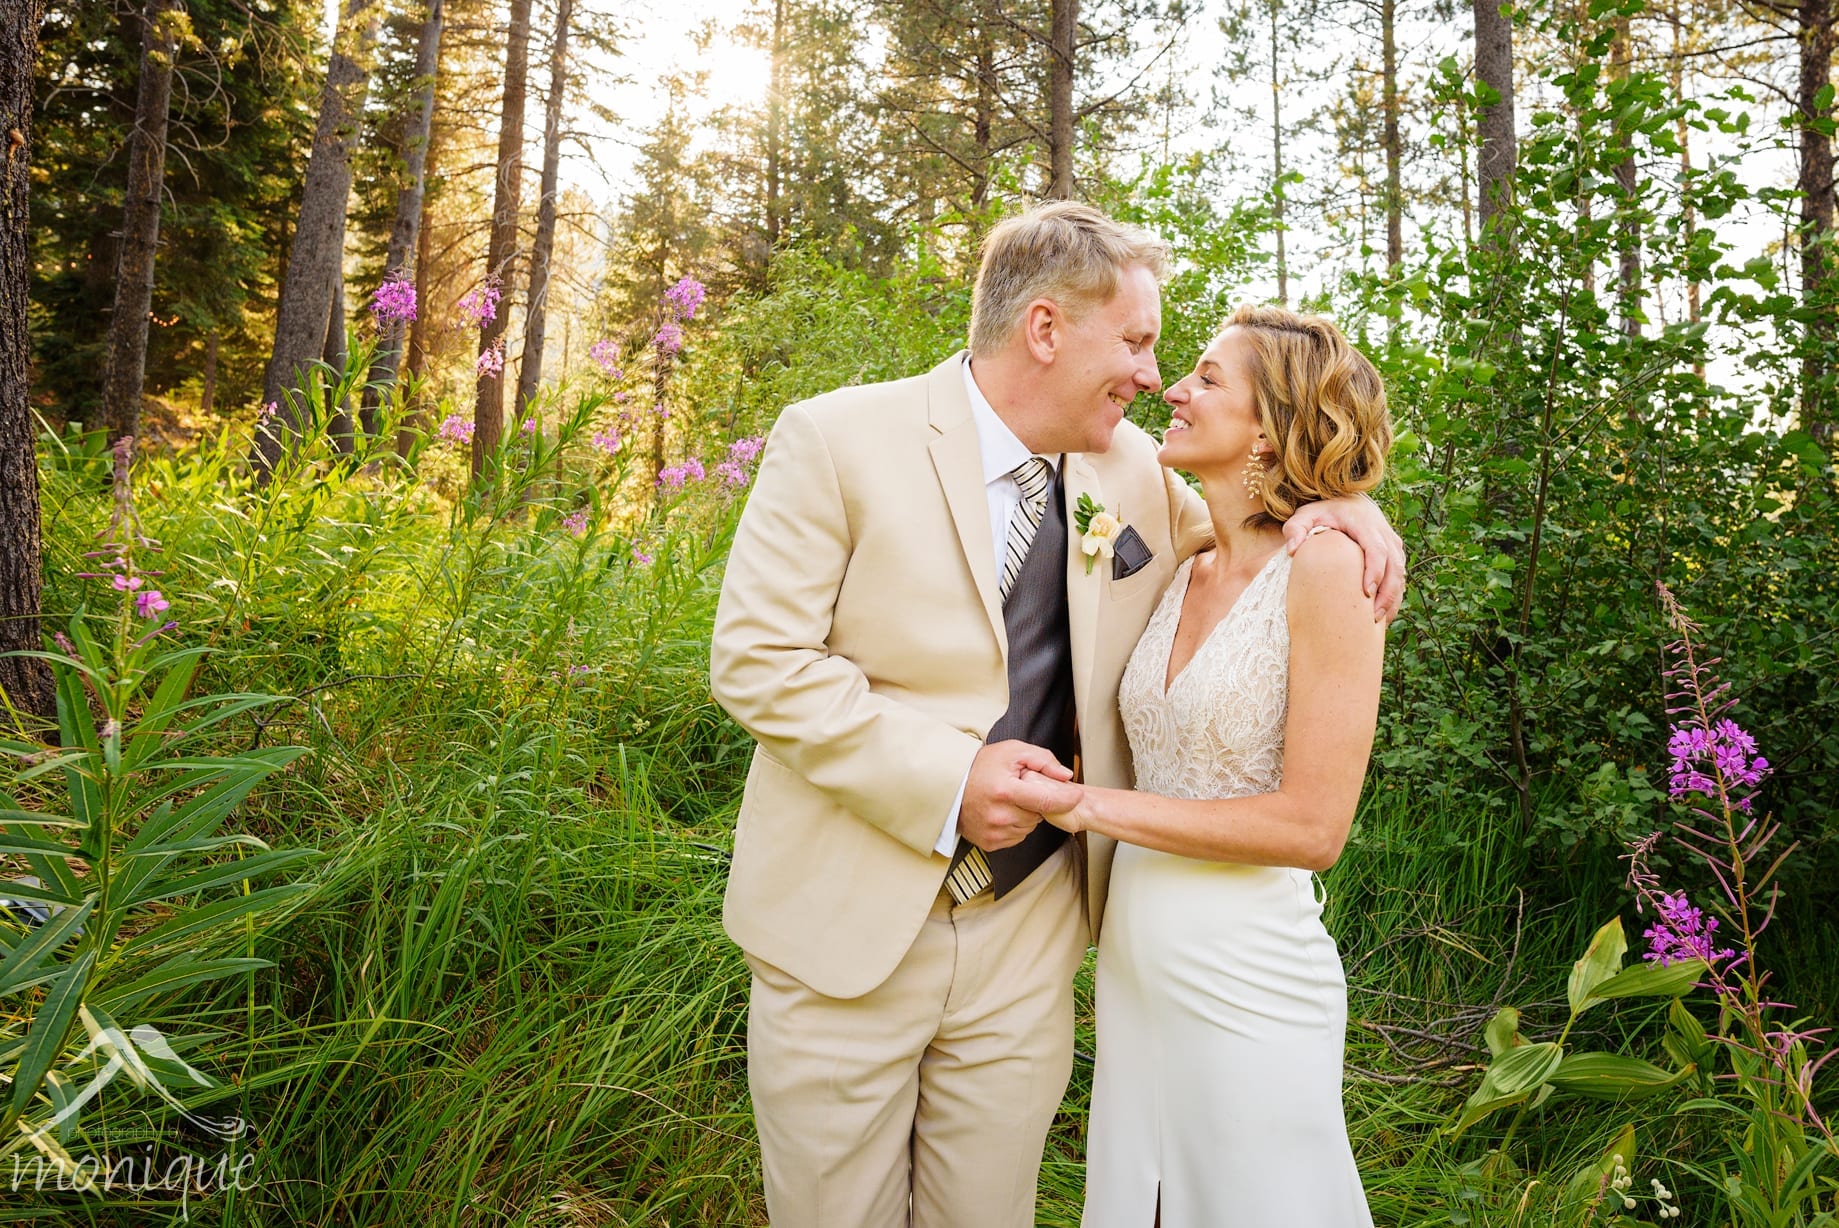 Bullshead Lodge Truckee River wedding photography with the bride and groom in the forest with wild flowers